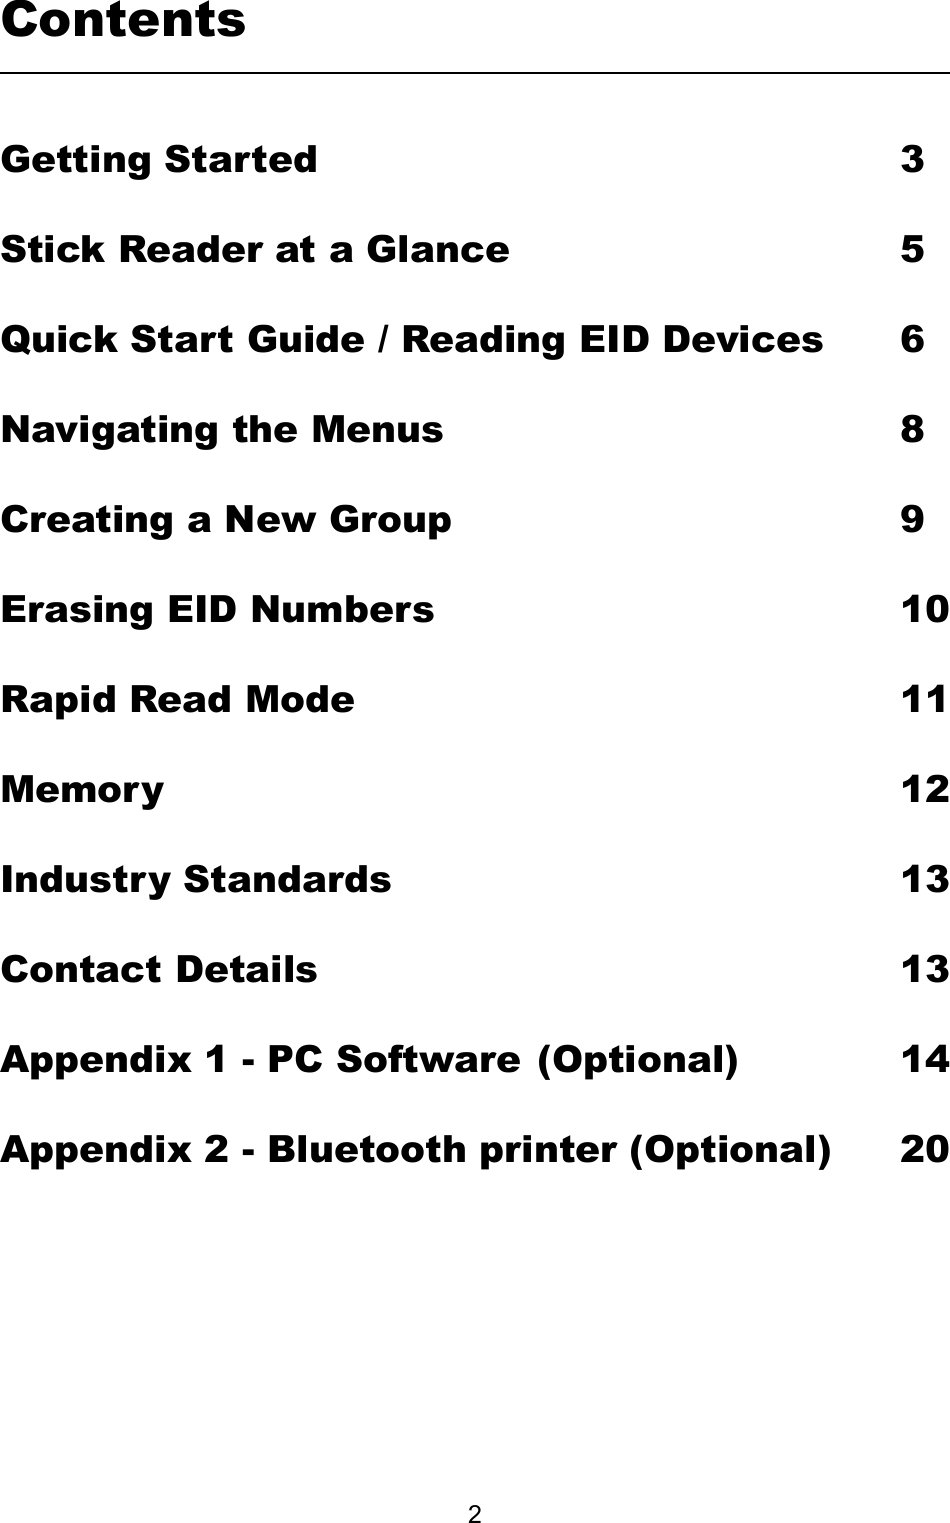         2ContentsGetting Started                3Stick Reader at a Glance            5Quick Start Guide / Reading EID Devices   6Navigating the Menus             8Creating a New Group            9Erasing EID Numbers             10 Rapid Read Mode                11Memory                     12Industry Standards              13Contact Details                 13Appendix 1 - PC Software  (Optional)     14Appendix 2 - Bluetooth printer (Optional)  20